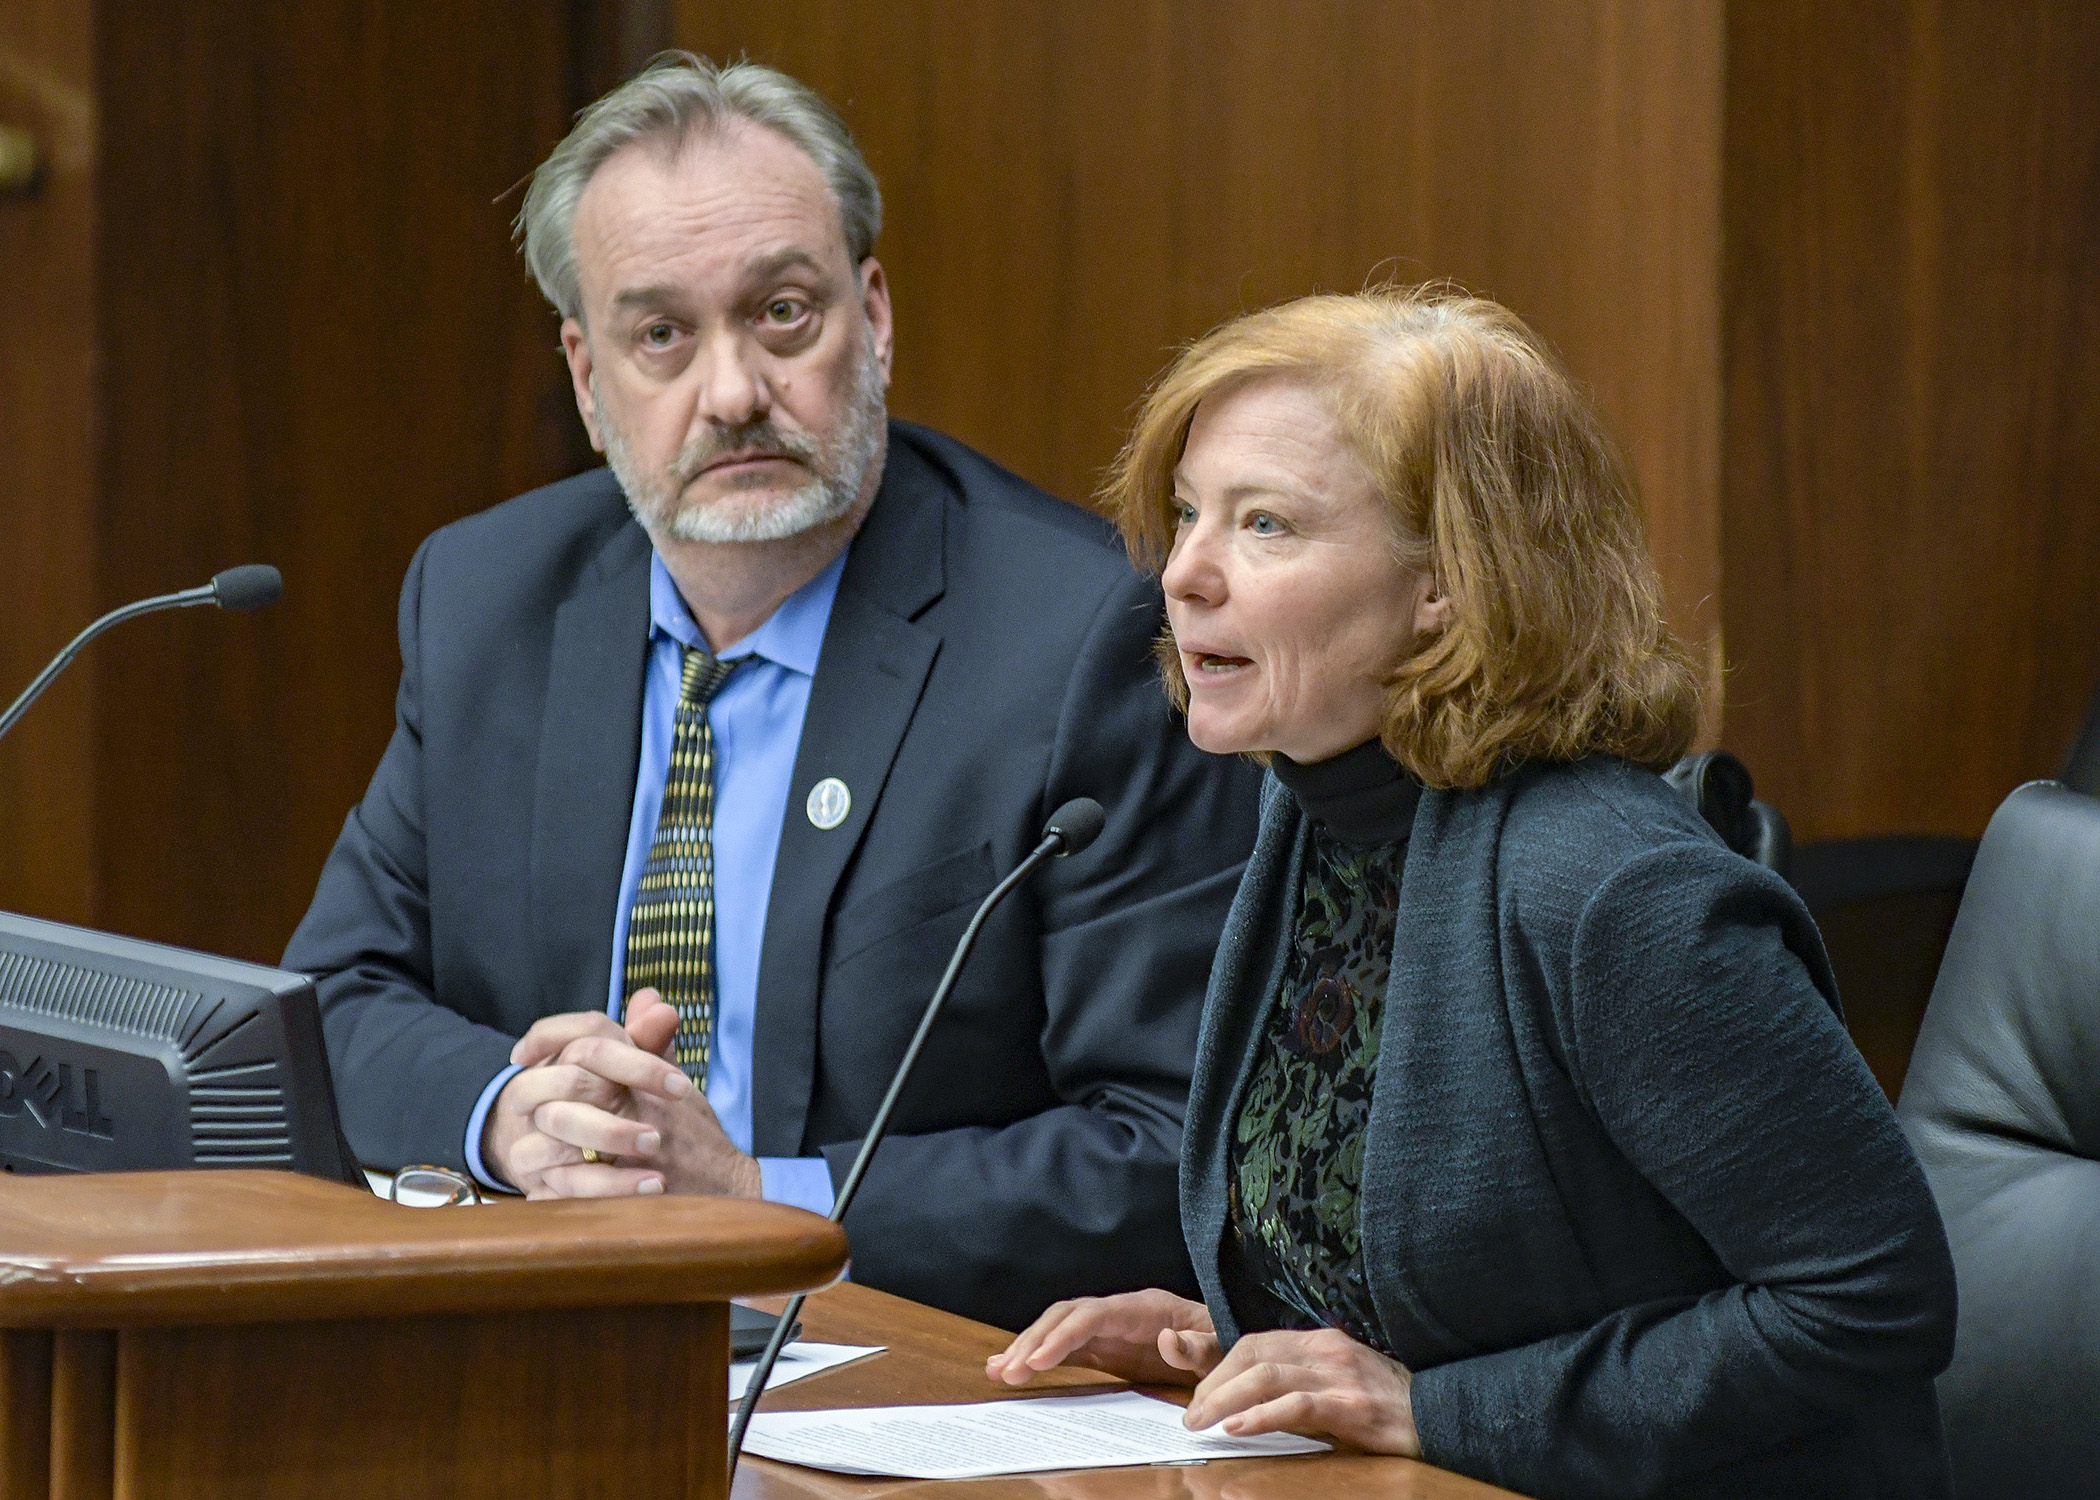 Representing the Coalition of Greater Minnesota Cities, Elizabeth Wefel testifies before the House Environment and Natural Resources Finance Division for a bill sponsored by Rep. Rick Hansen, left, on capital projects funding. Photo by Andrew VonBank